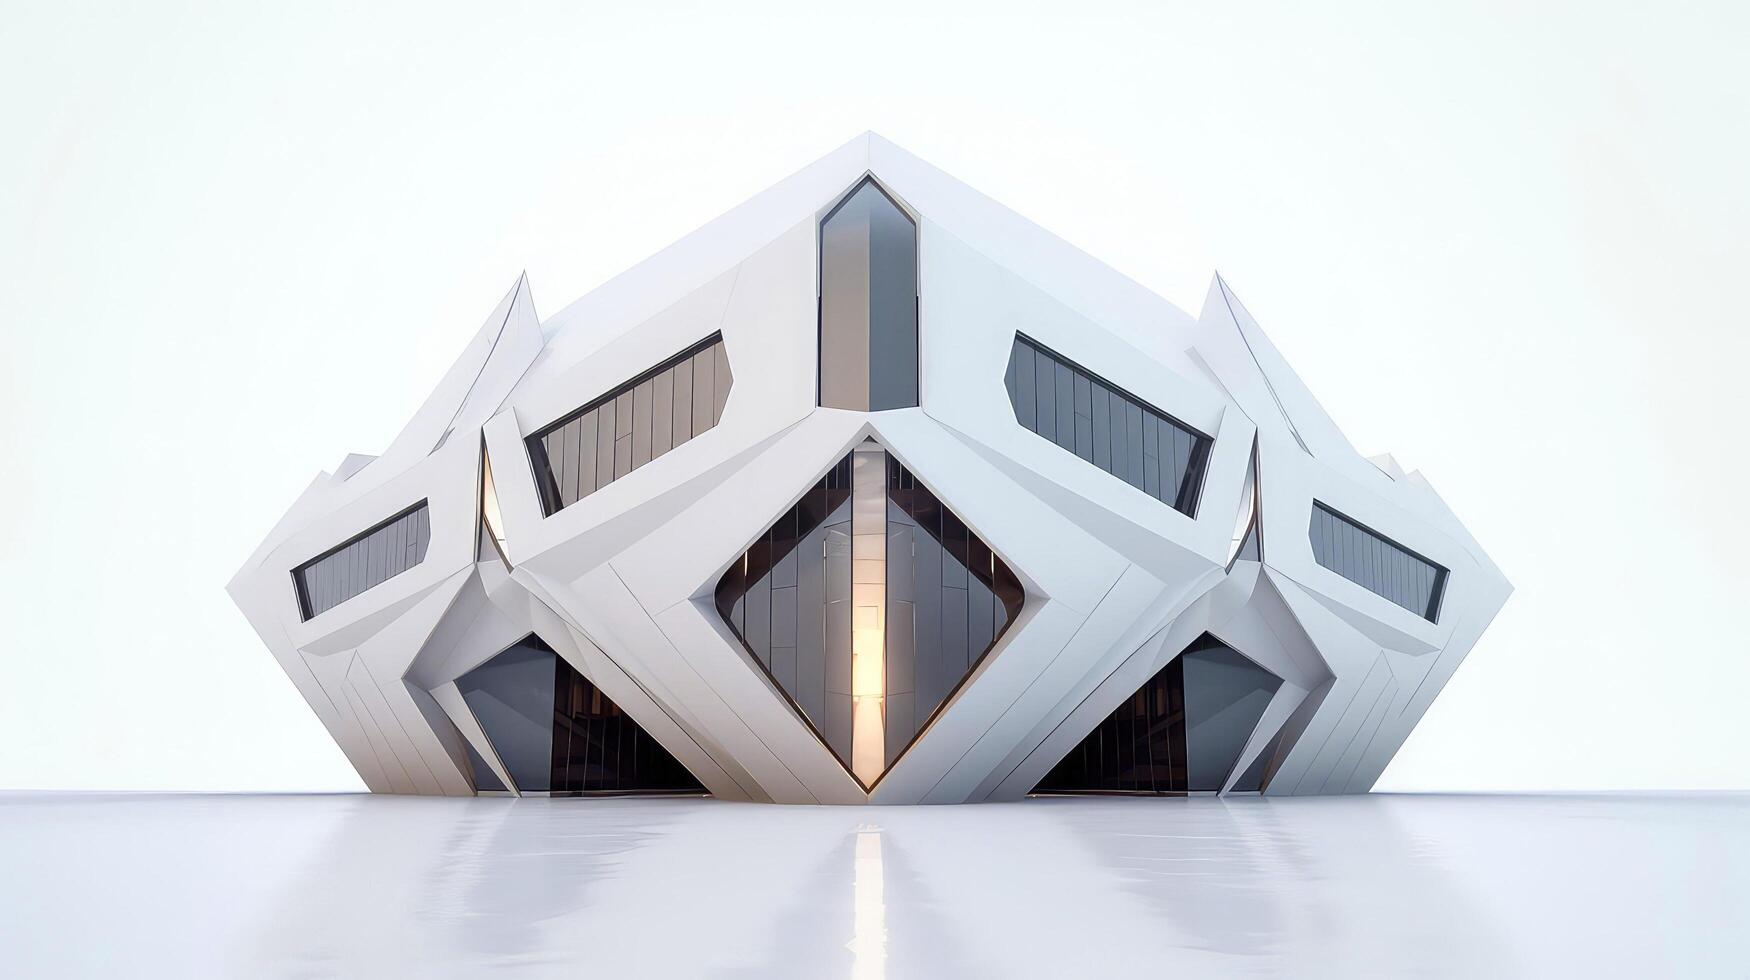 3D futuristic sci-fi white city architecture with organic skyscrapers, for science fiction or fantasy backgrounds, Abstract building, illustration photo